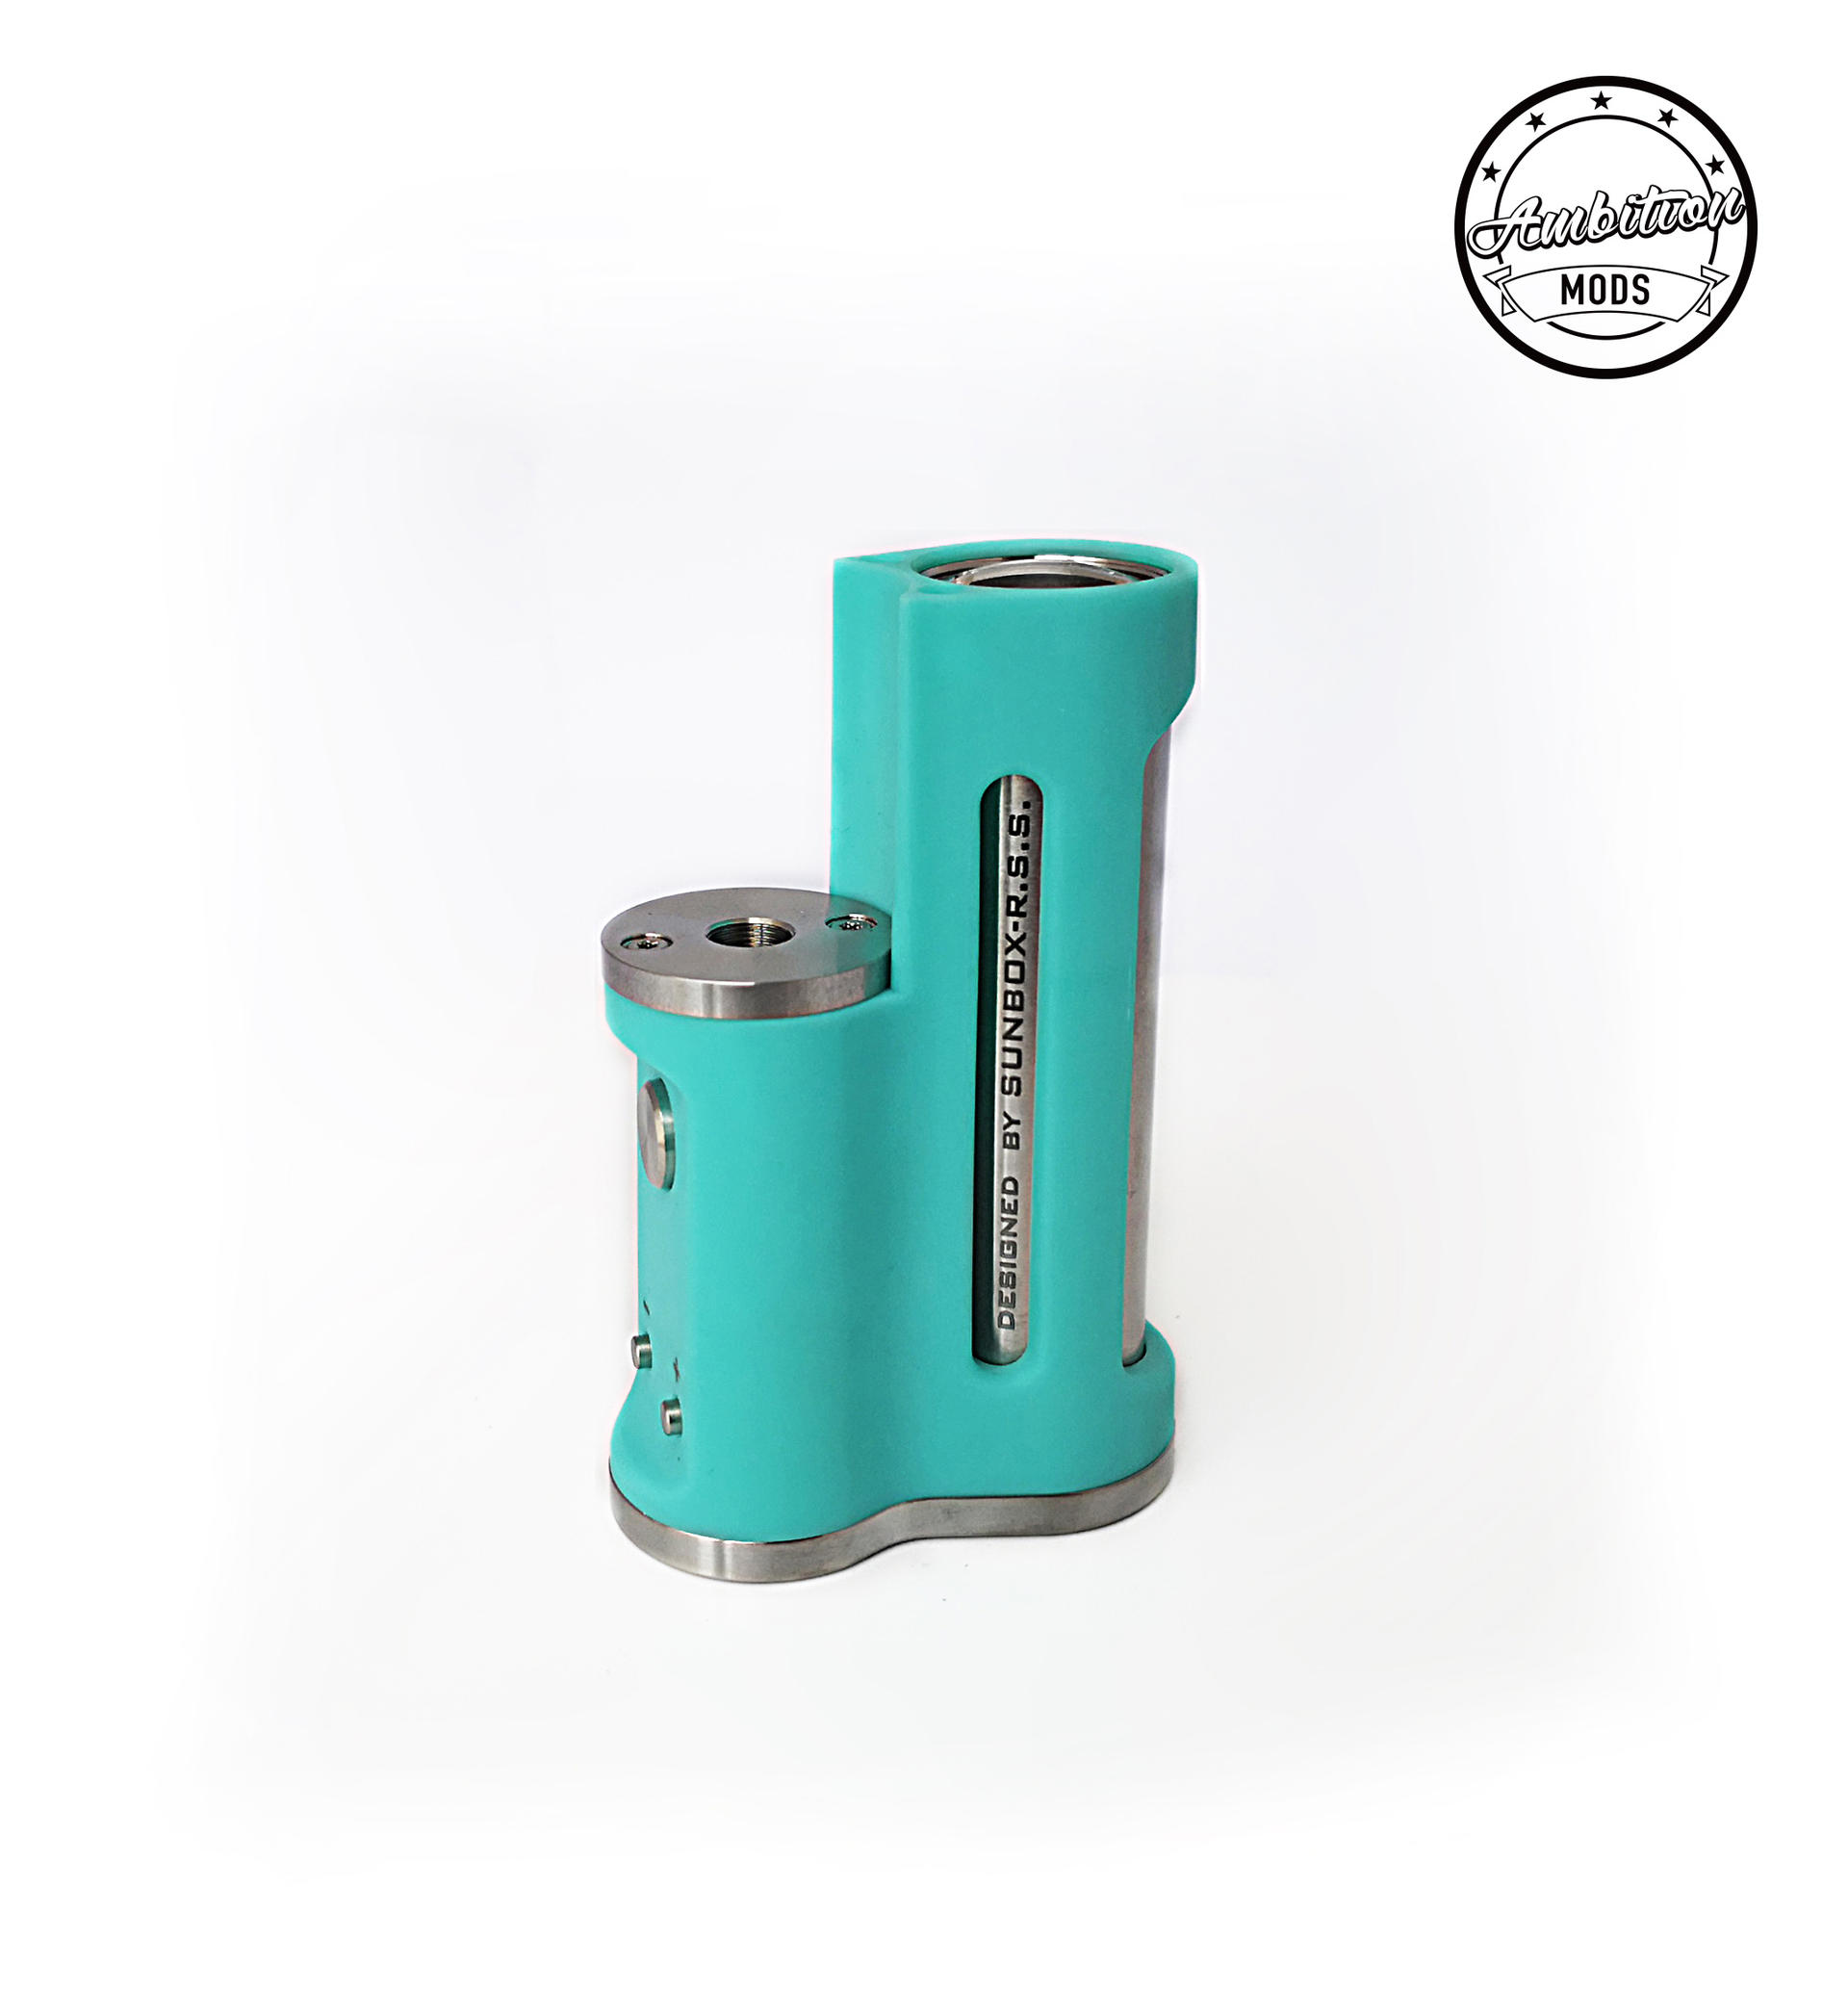 Easy Side Box Mod 60W By Ambition Mods and R. S. S. -Sunbox